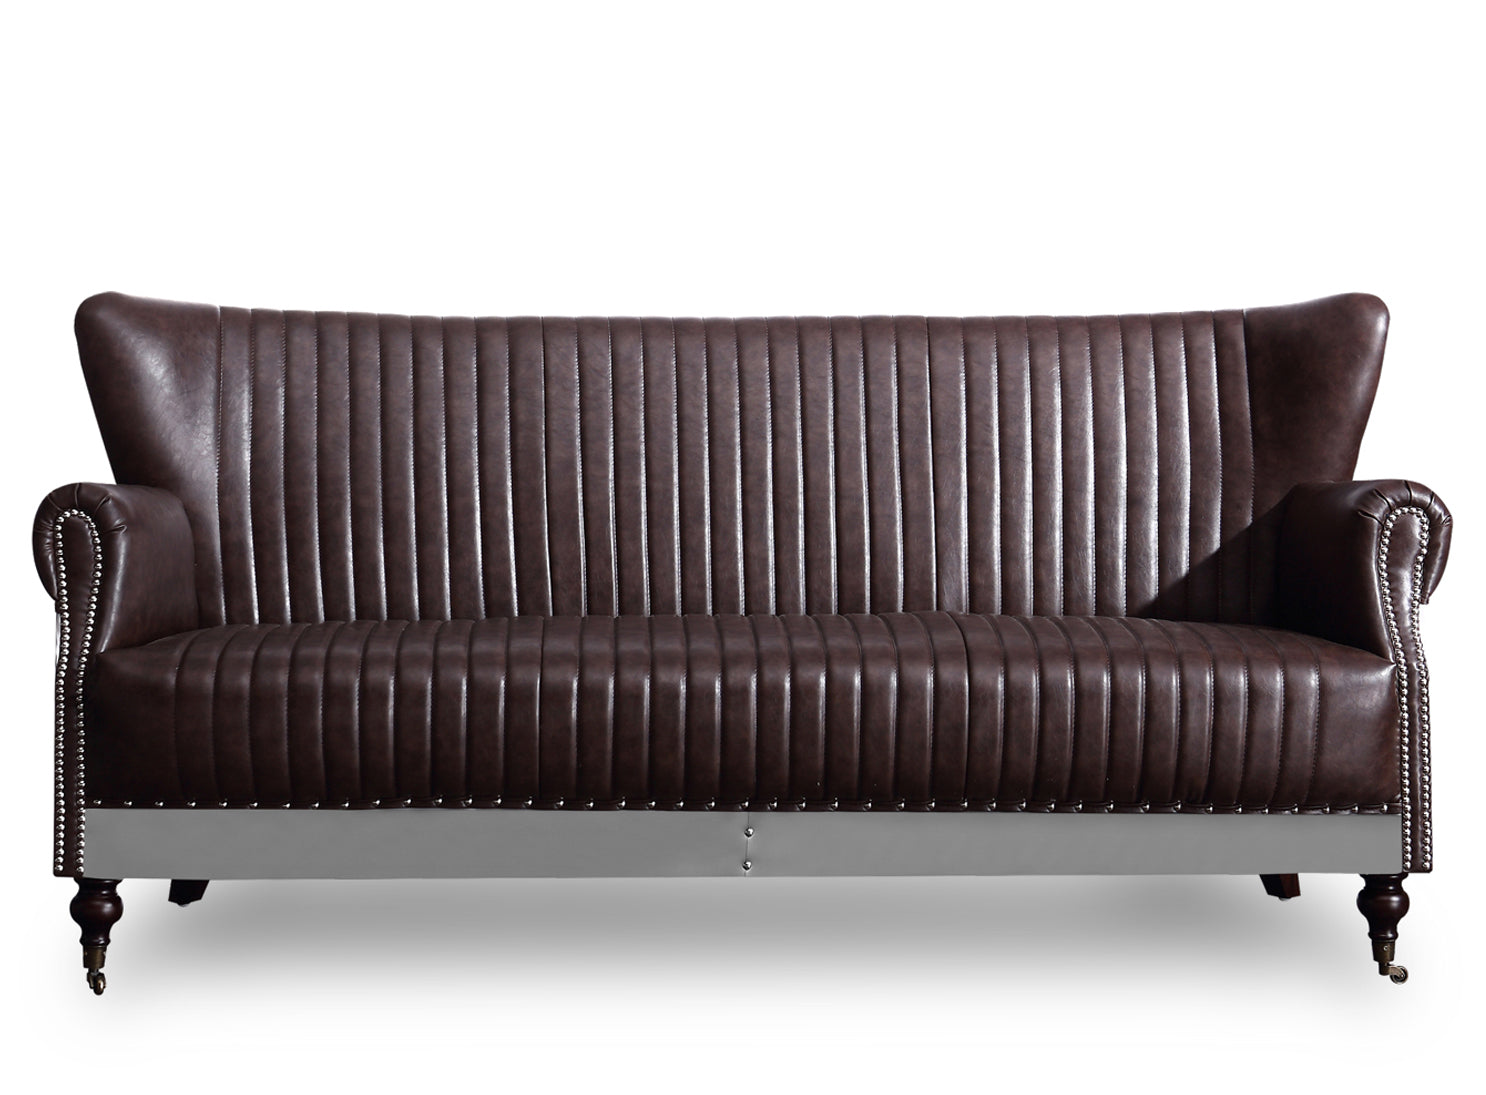 Wing Back Aviator 3 Seater Sofa Industrial Retro Brown PU Leather